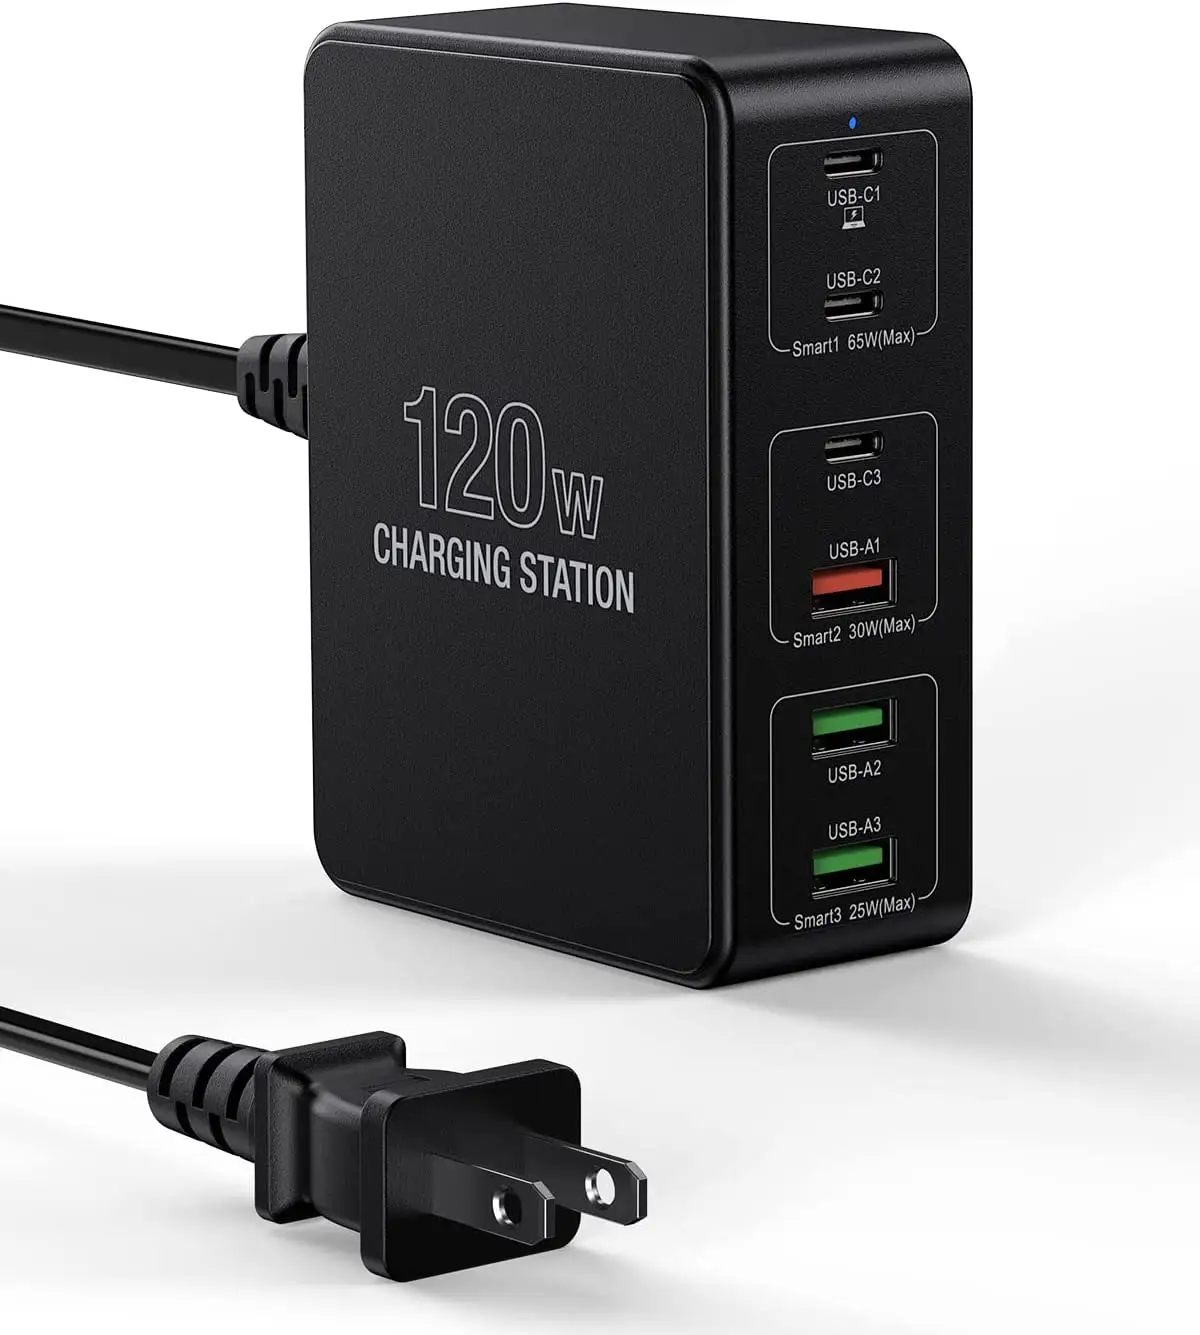 iLEPO 120W charger CE FCC ROHS USB Charger with 6 Ports contains 1 USB C and 5 USB-A ports Multiple Charger Charging Station